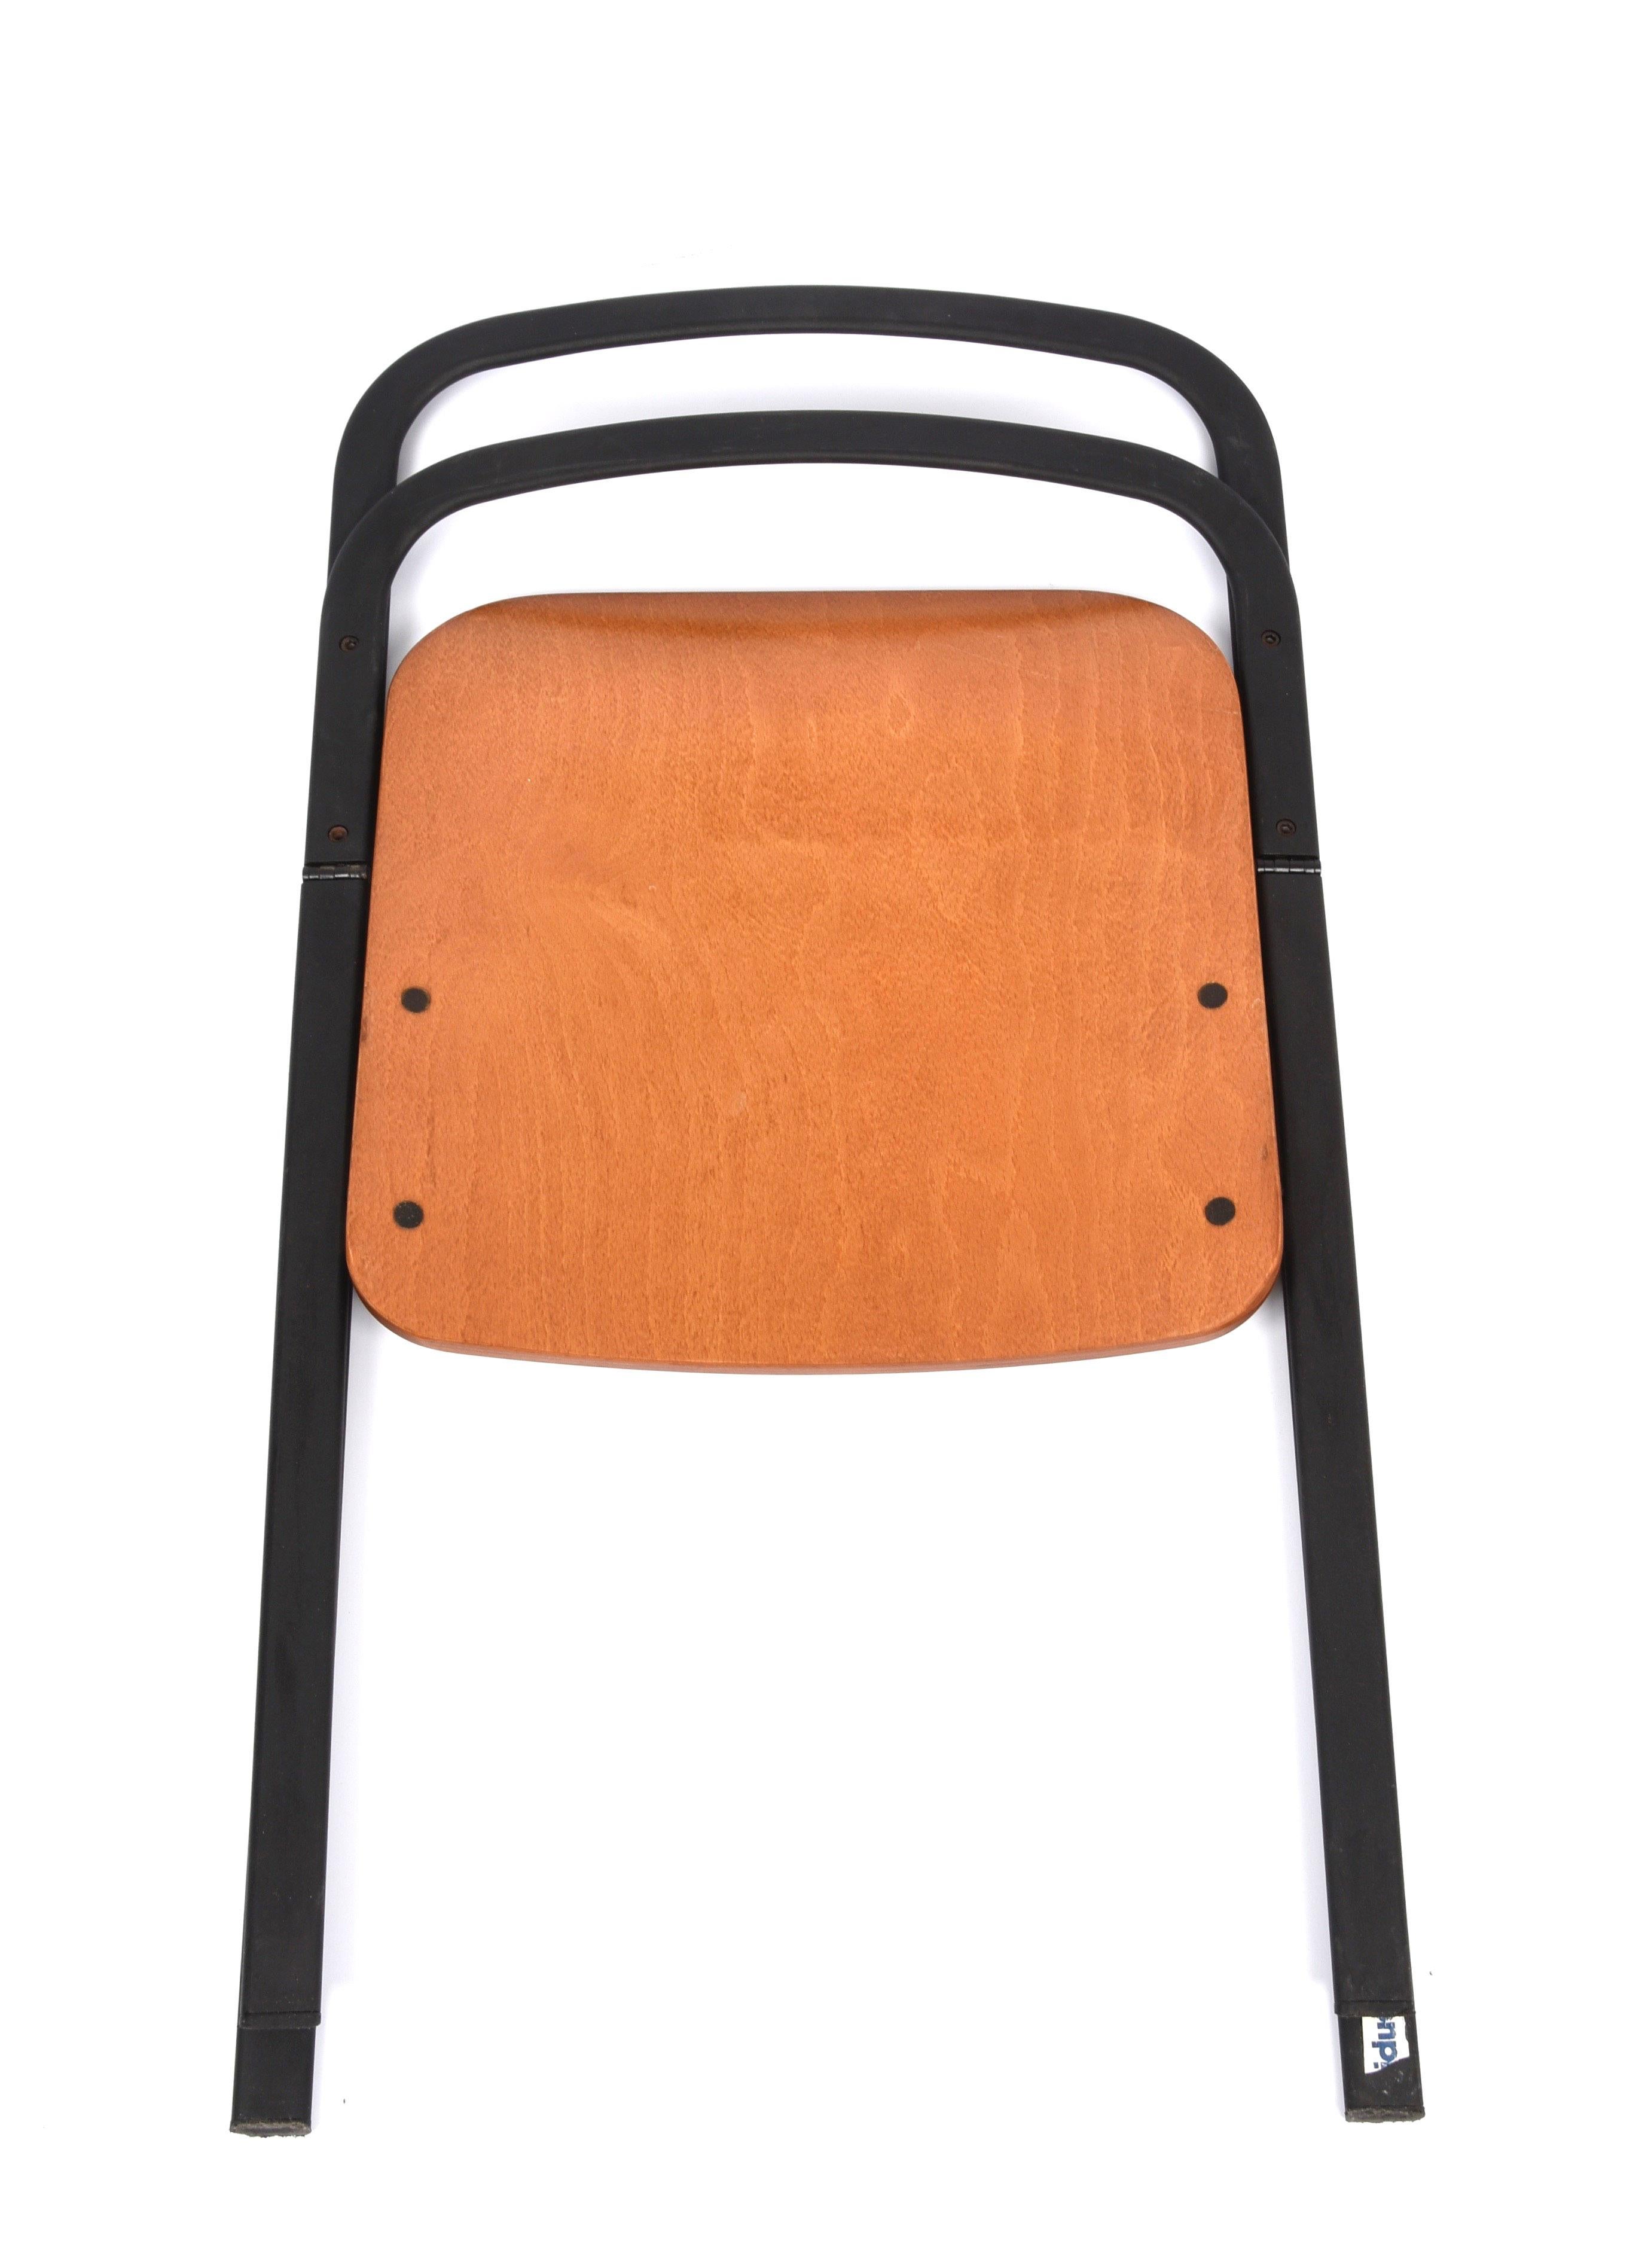 Pair of Midcentury Giorgio Cattelan Italian Folding Chairs for Cidue Italy 1970s For Sale 1